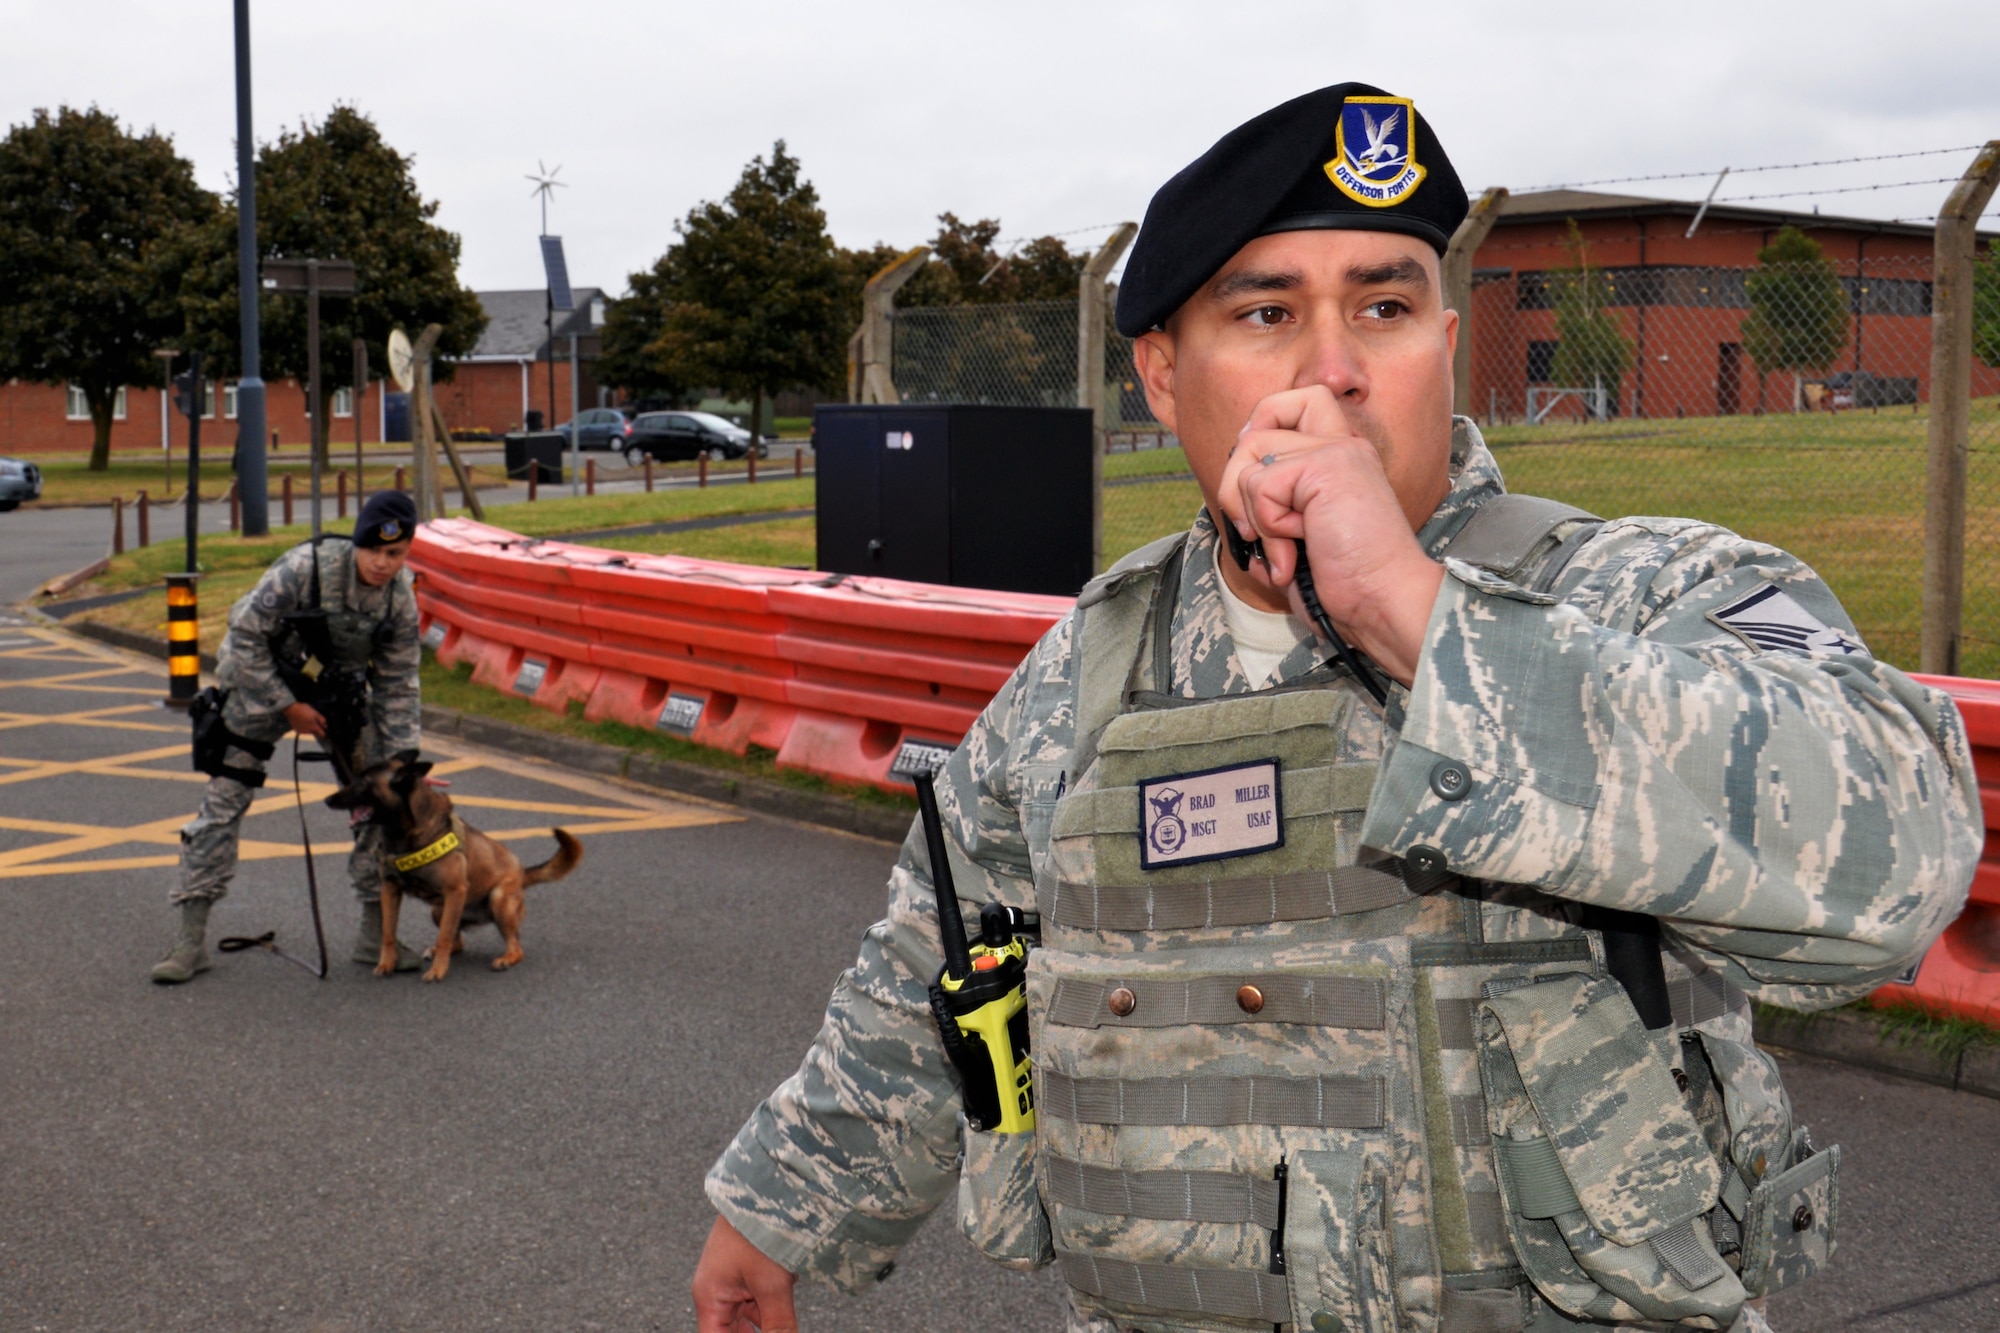 U.S. Air Force Master Sgt. Brad Miller, 100th Security Forces Squadron flight chief, speaks into his radio while Staff Sgt. Kristina Santos and Military Working Dog Ukkie stand ready in response to a simulated protest incident during an exercise at RAF Mildenhall, England, June 20, 2018. Such exercises are regularly scheduled to test responsiveness and readiness of base personnel. (U.S. Air Force photo by Tech. Sgt. David Dobrydney)